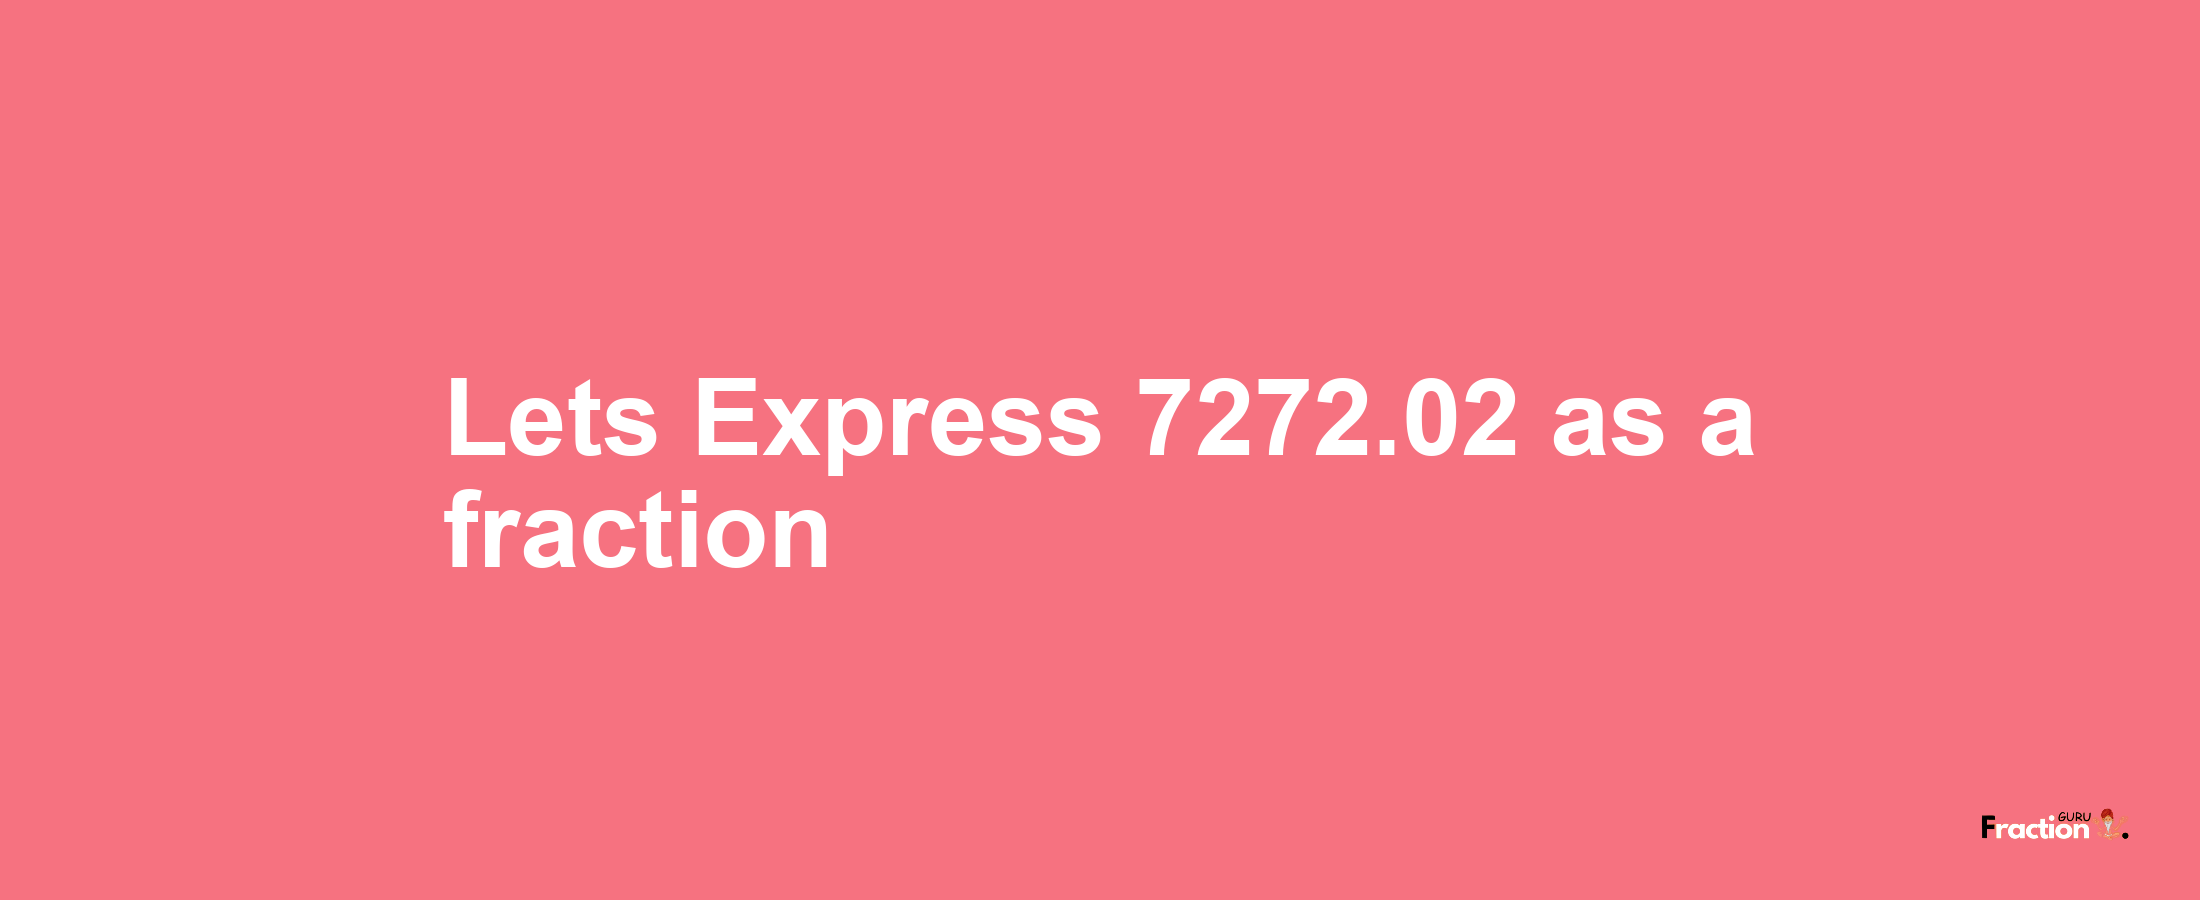 Lets Express 7272.02 as afraction